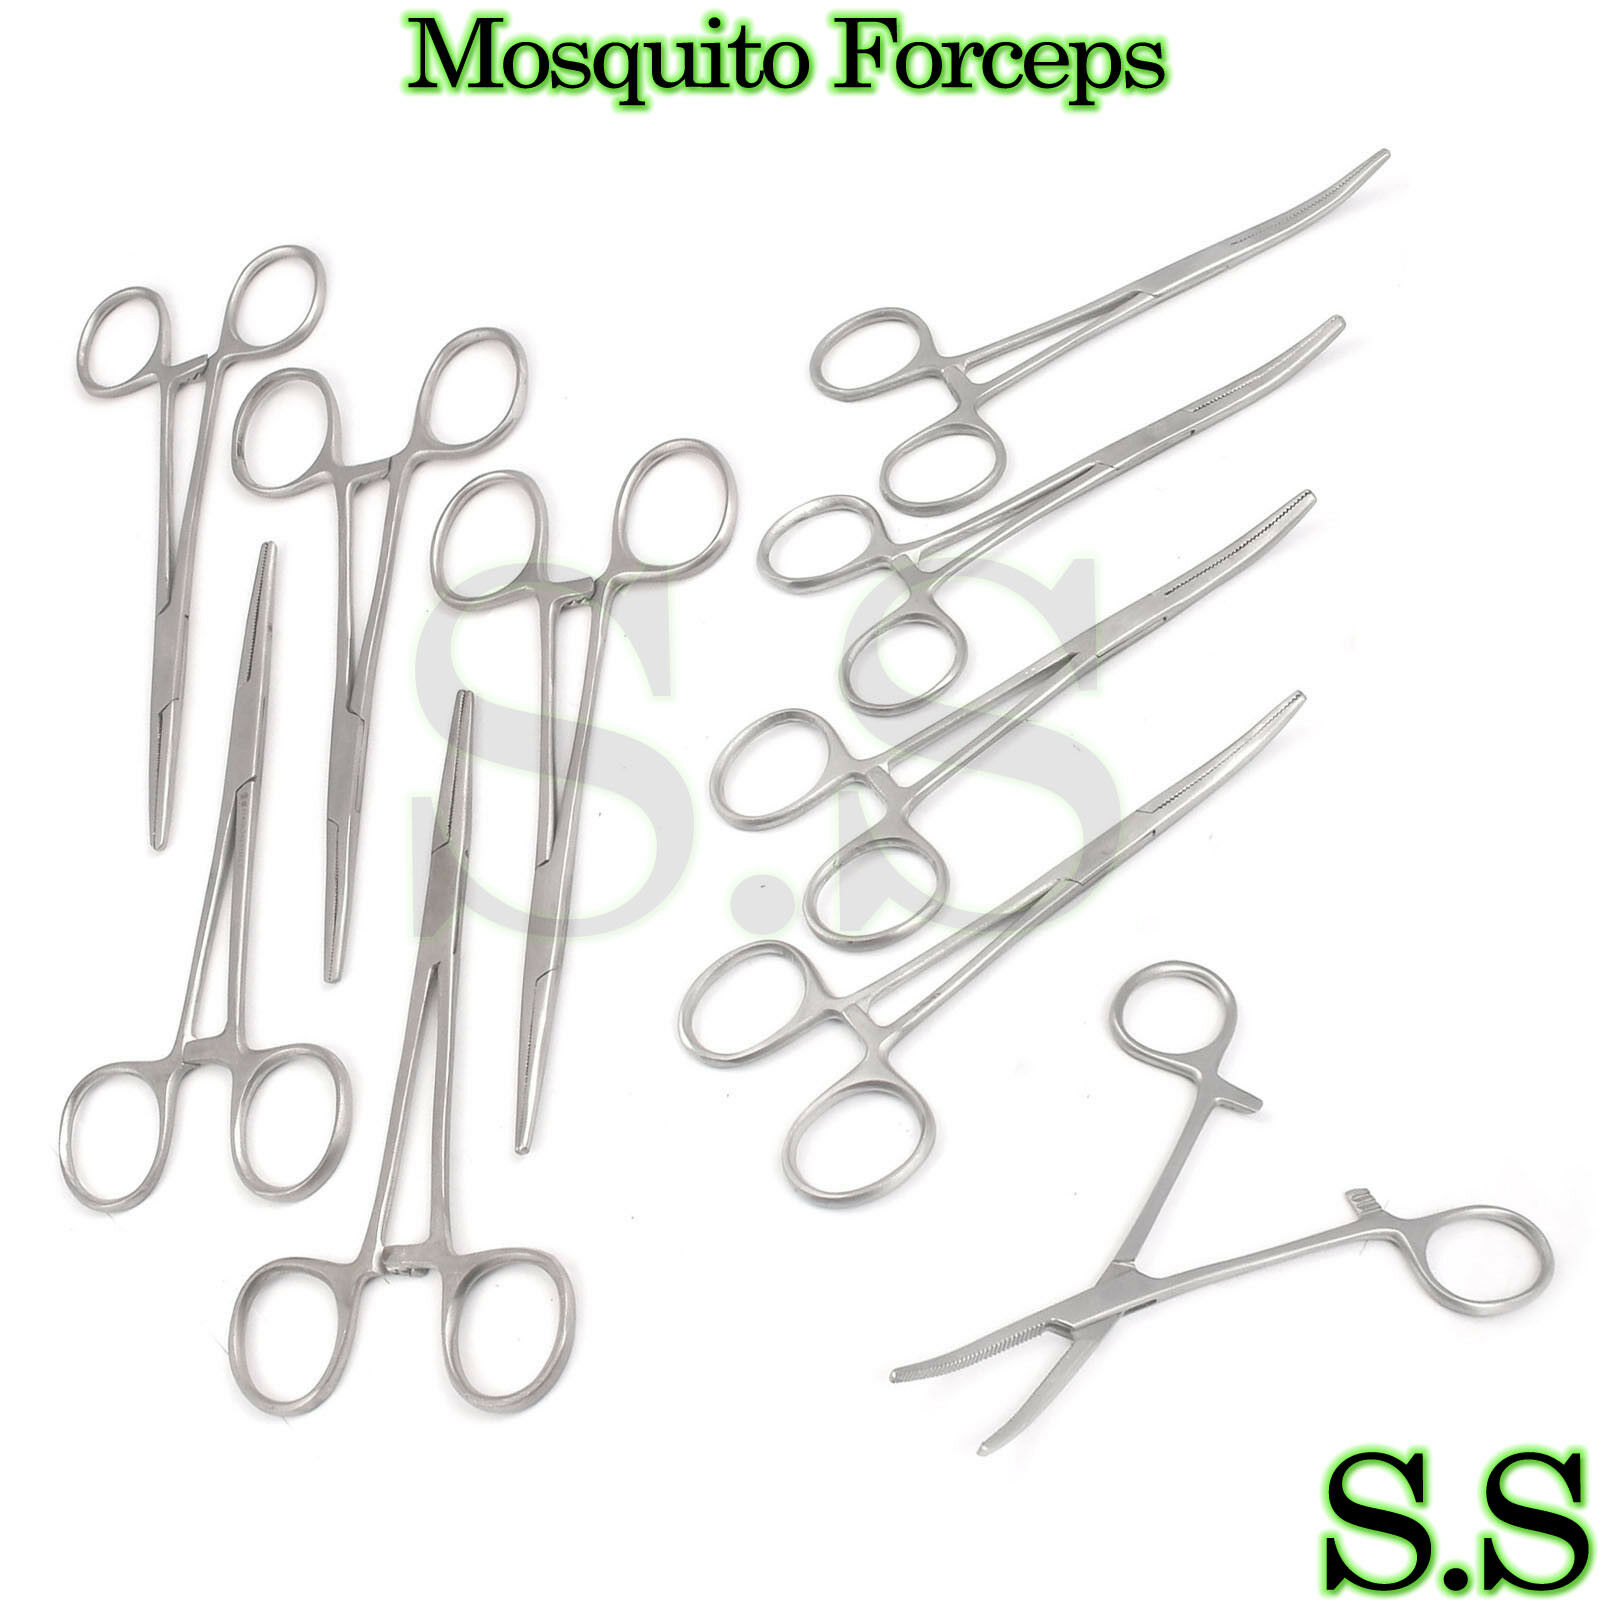 10 Pcs Mosquito Hemostat Locking Forceps 5 Curved & 5 Straight Surgical Dental